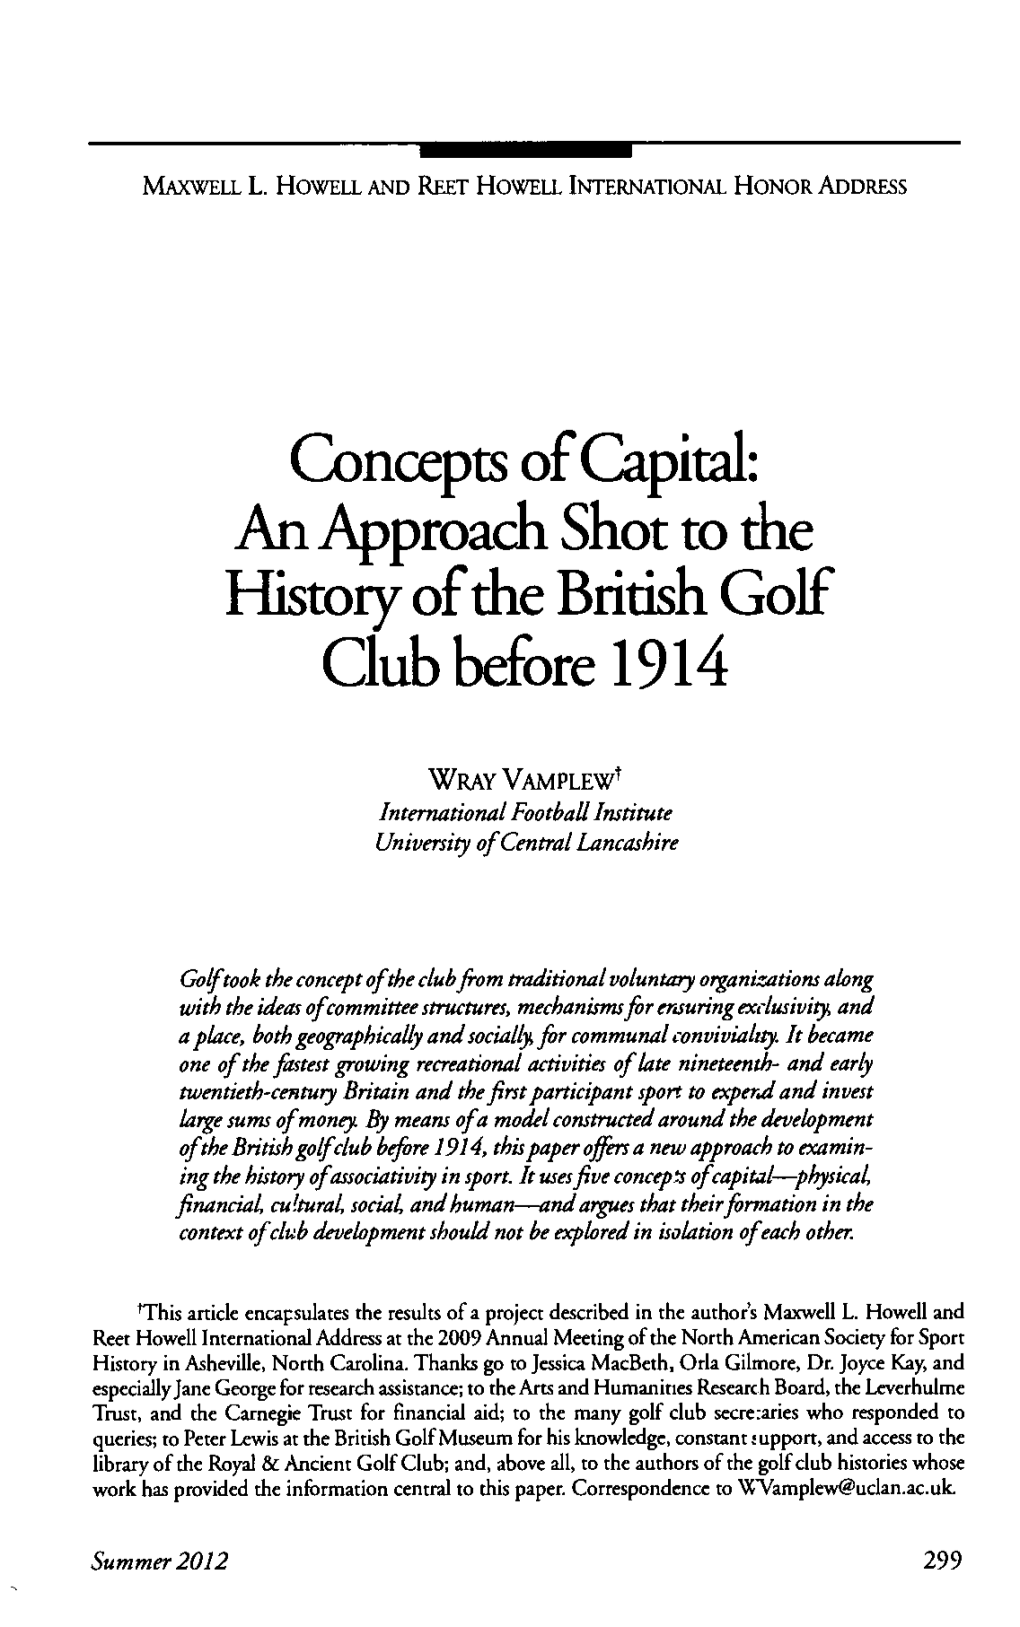 An Approach Shot to the History of the British Golf Club Before 1914